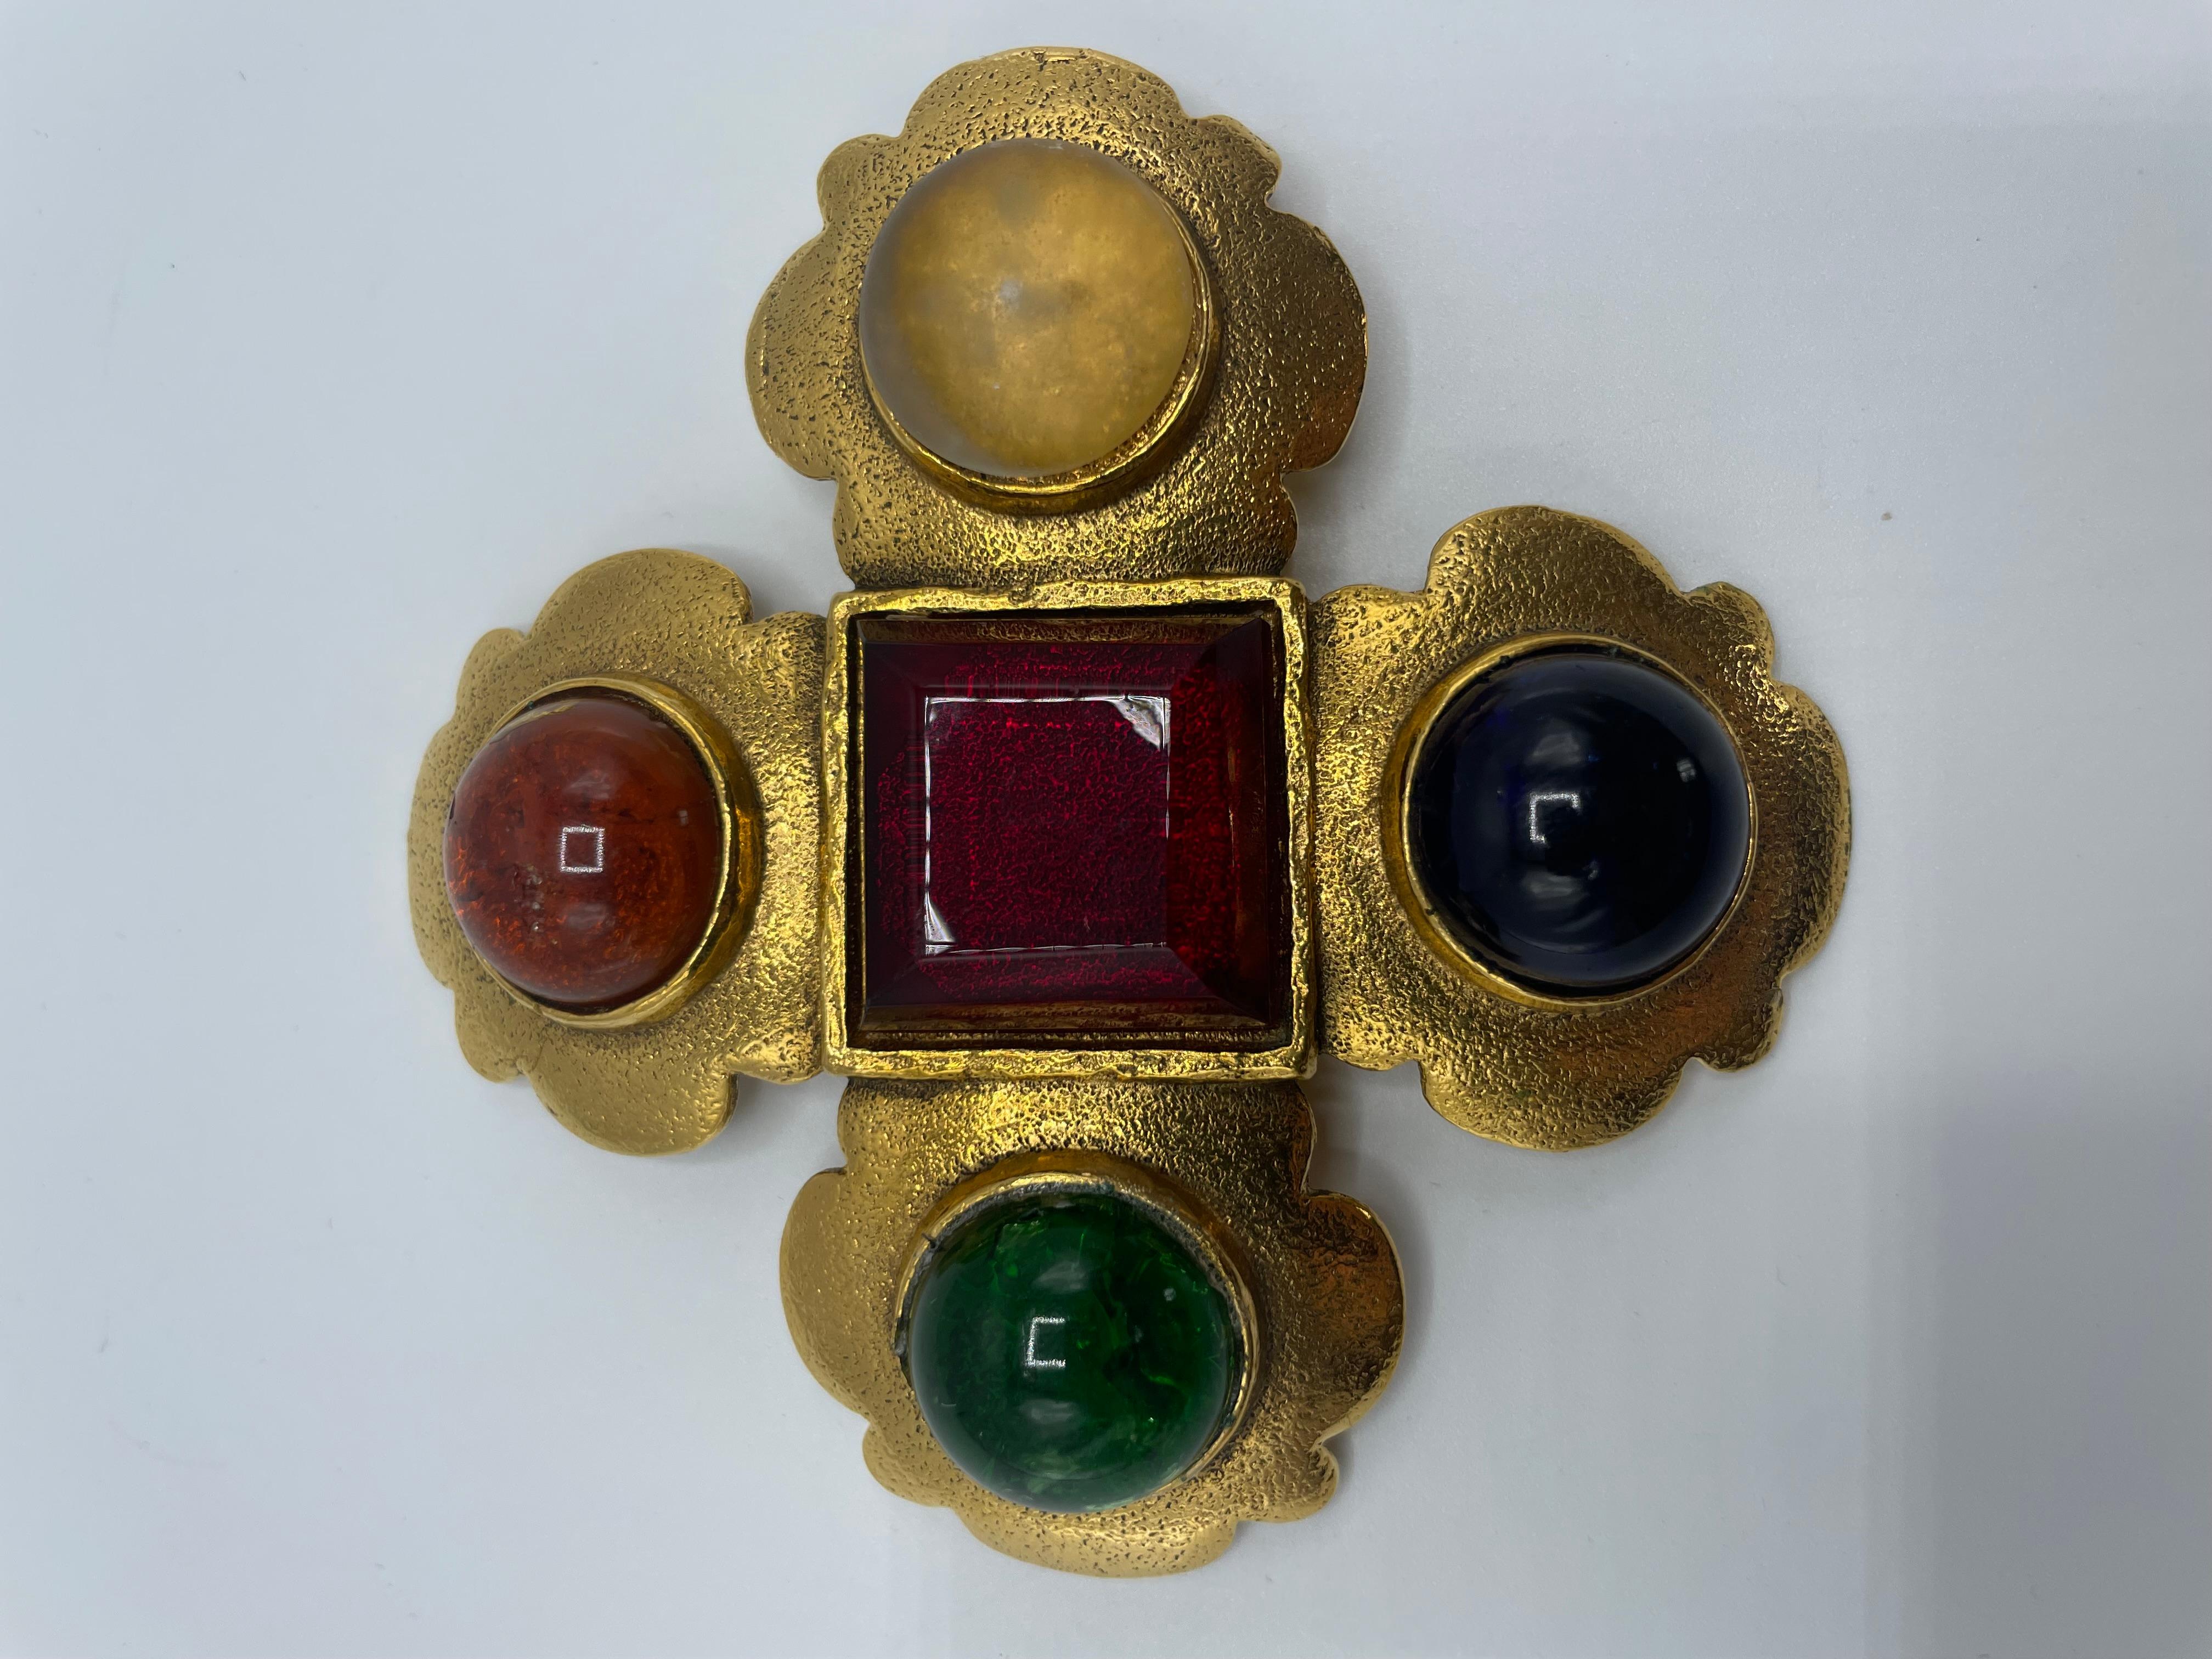 Chanel Brooch Gripoix designed by Victoire de Castelane In Good Condition For Sale In Palm Beach, FL